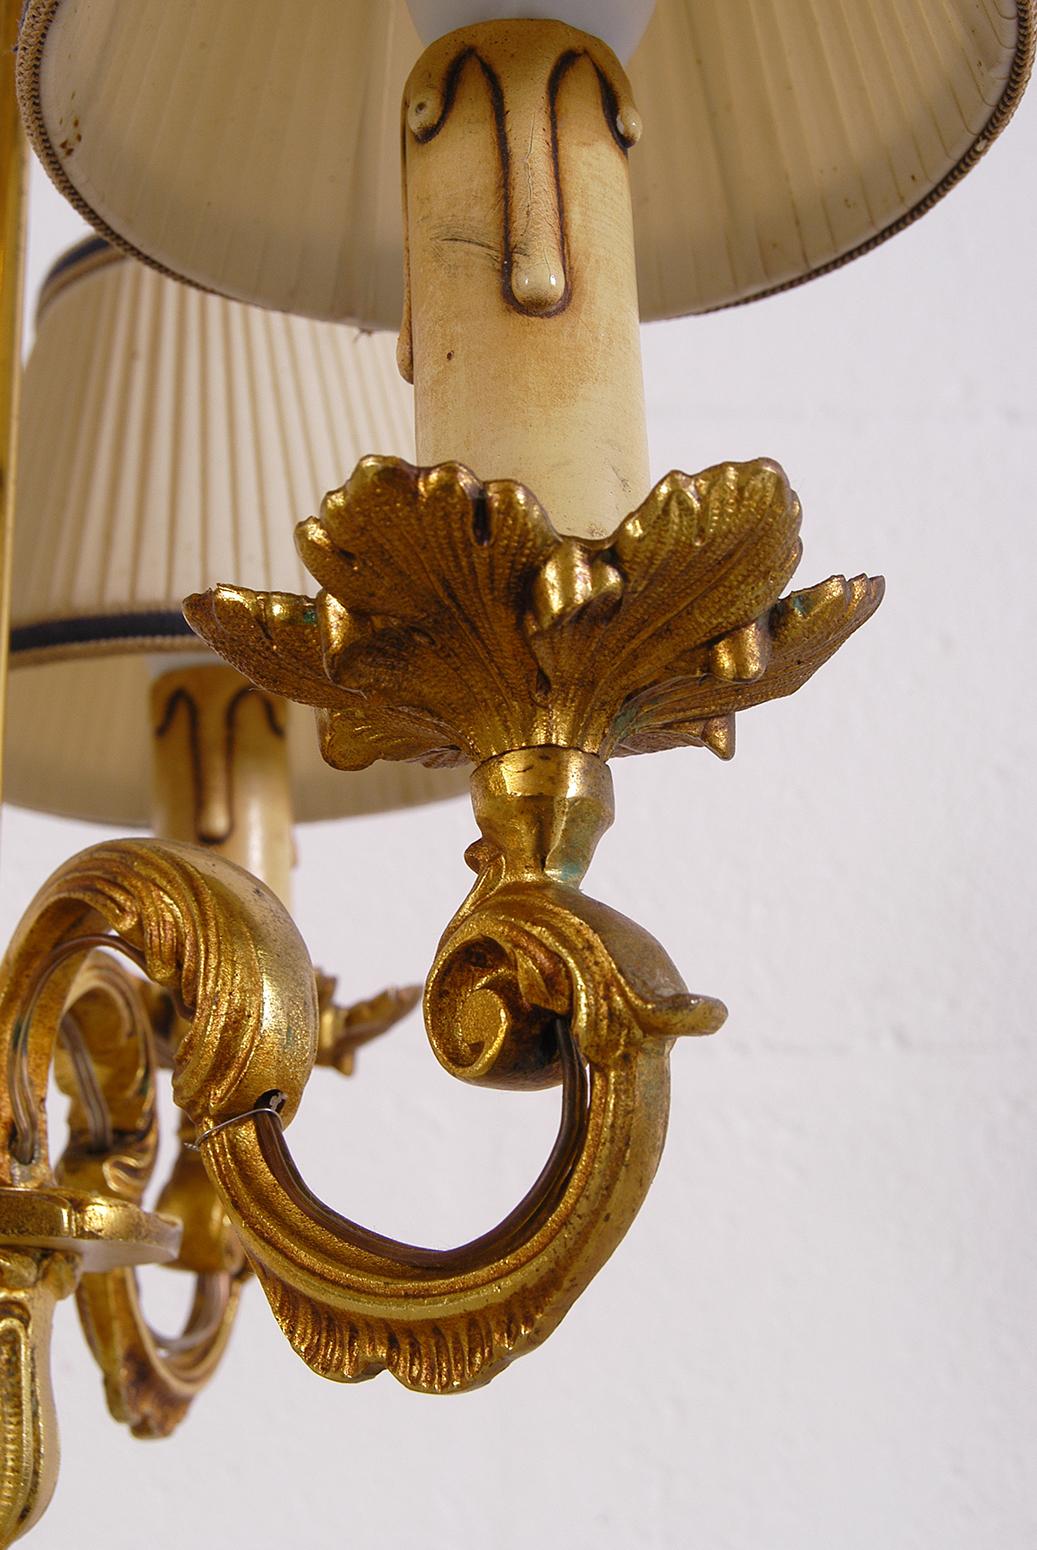 Mid-20th Century French Gilt Brass Three-Arm Table Lamp In Good Condition For Sale In Sherborne, Dorset